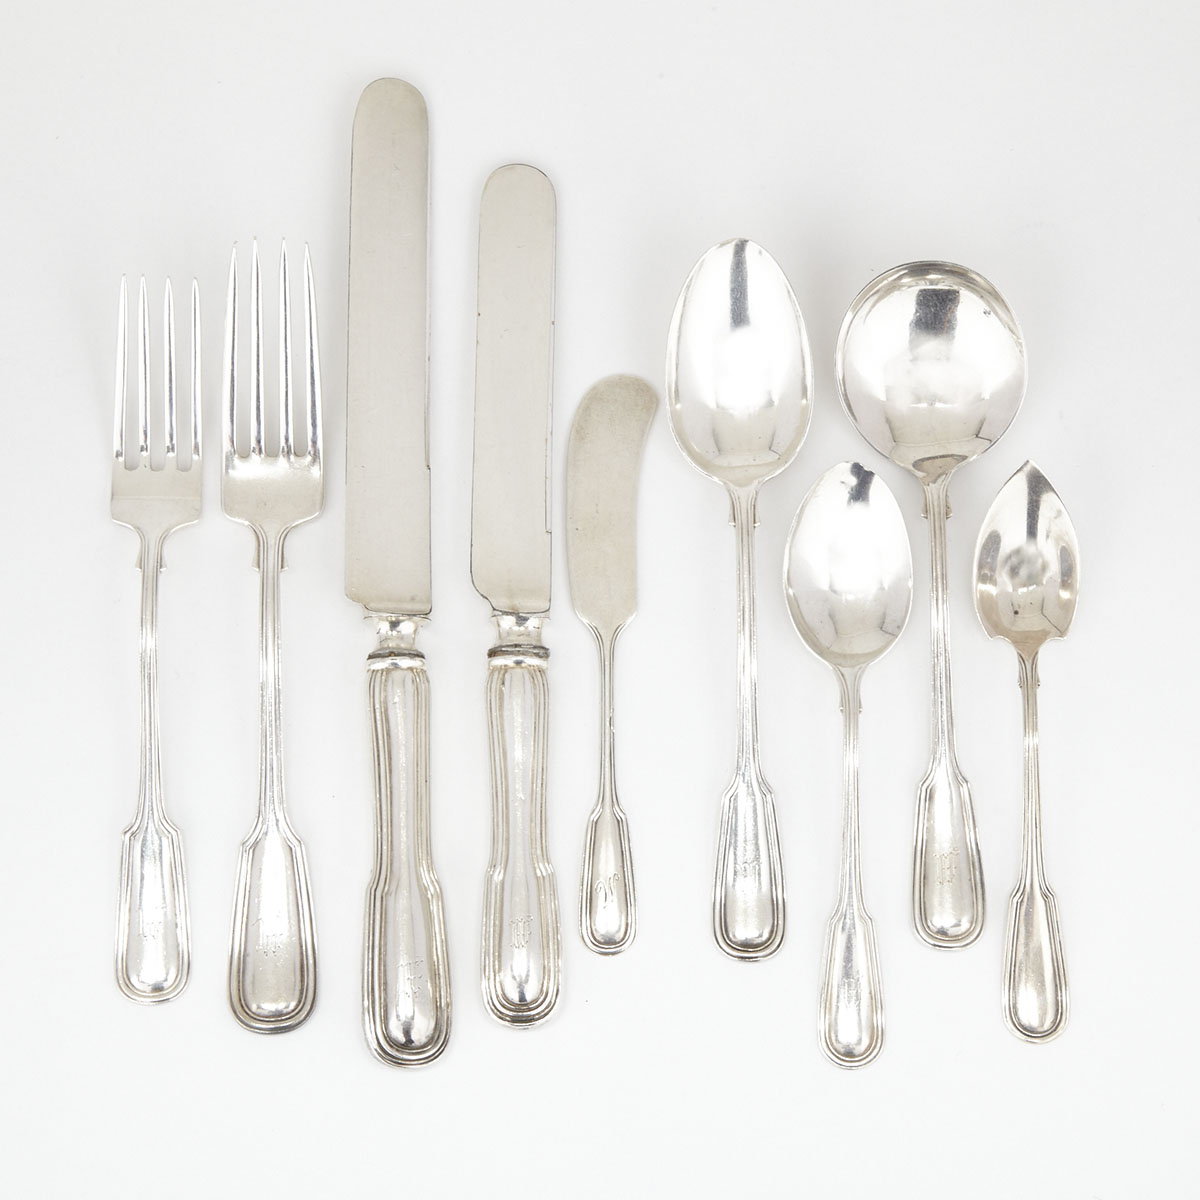 Canadian Silver Fiddle and Thread Pattern Flatware, J.E. Ellis & Co., Toronto, Ont., early 20th century